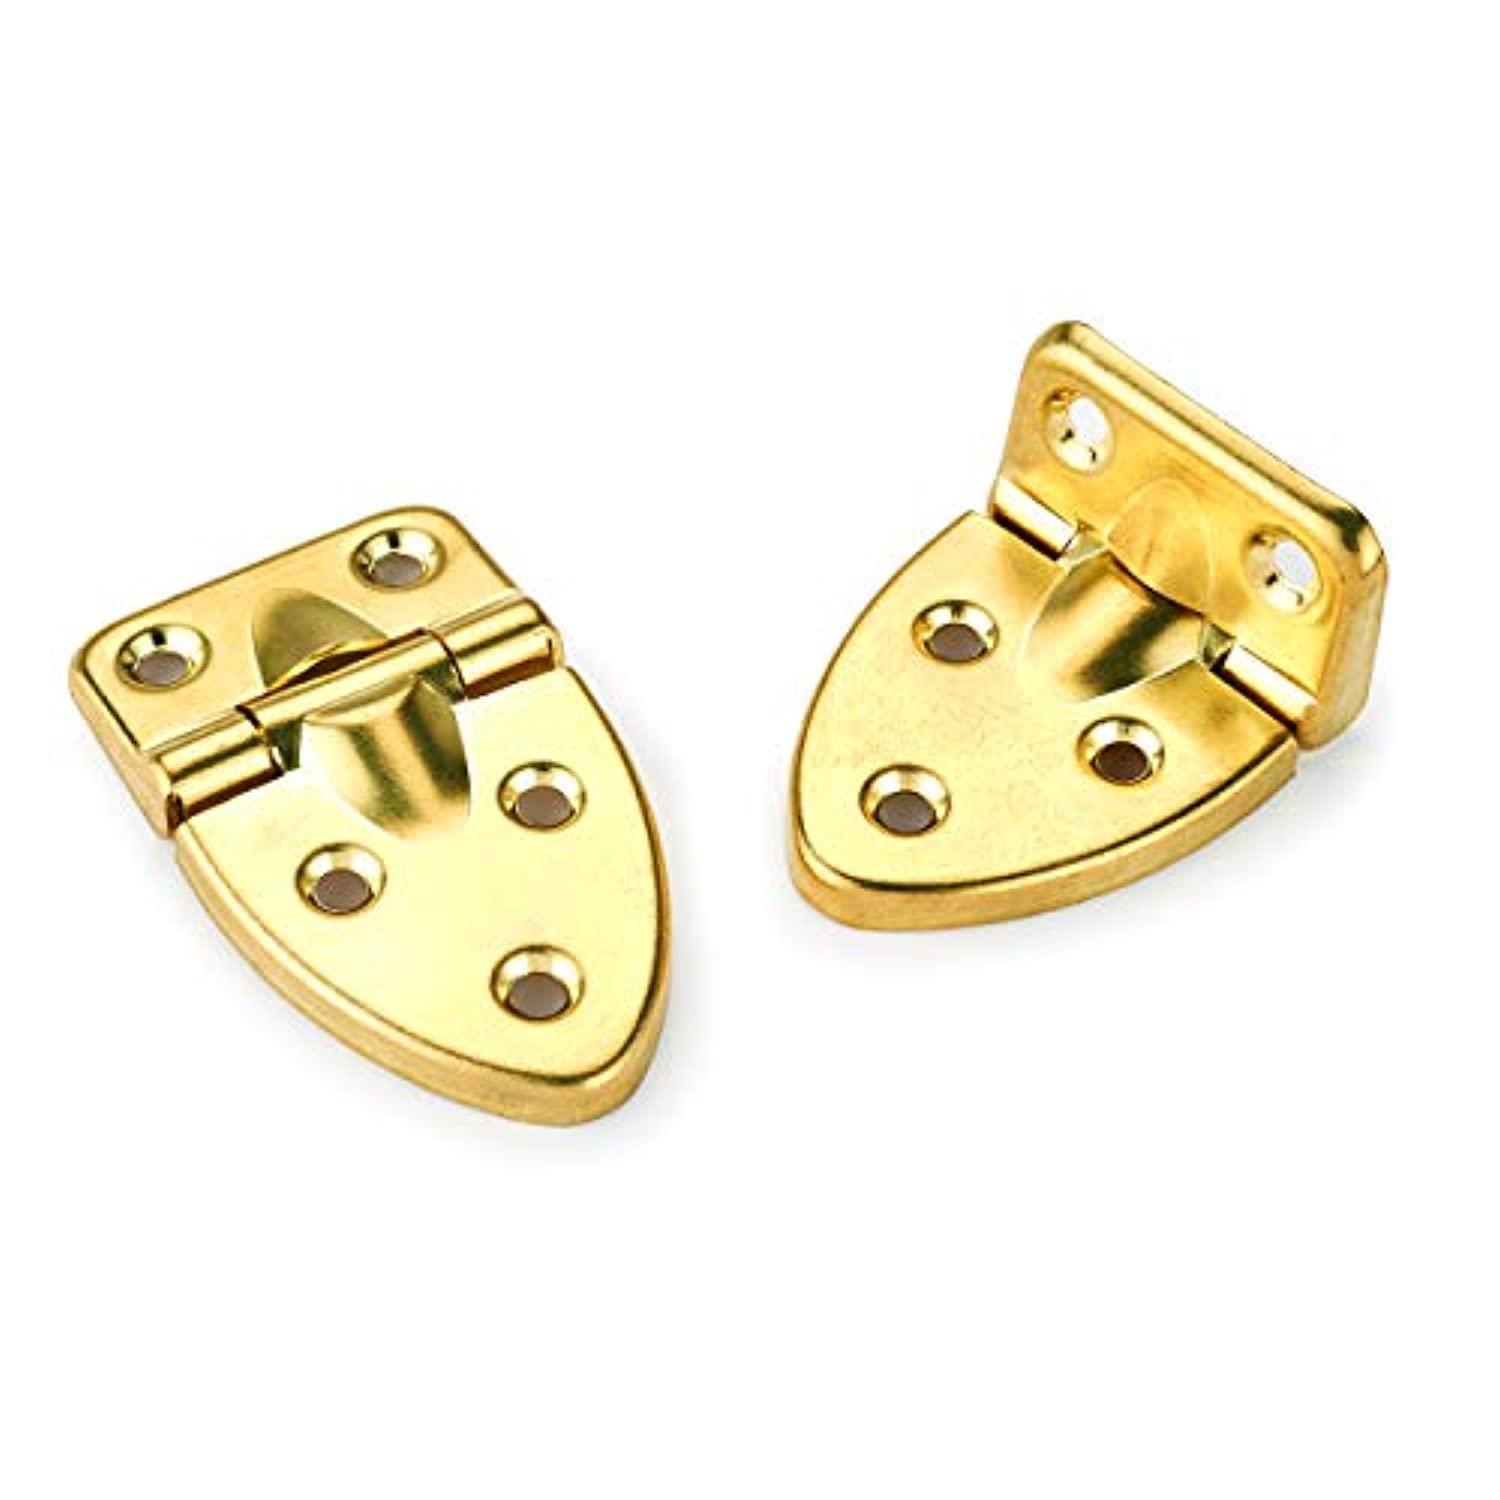 highpoint 90 degree stop hinge brass plated 2-19/32" x 1-17/32" pair